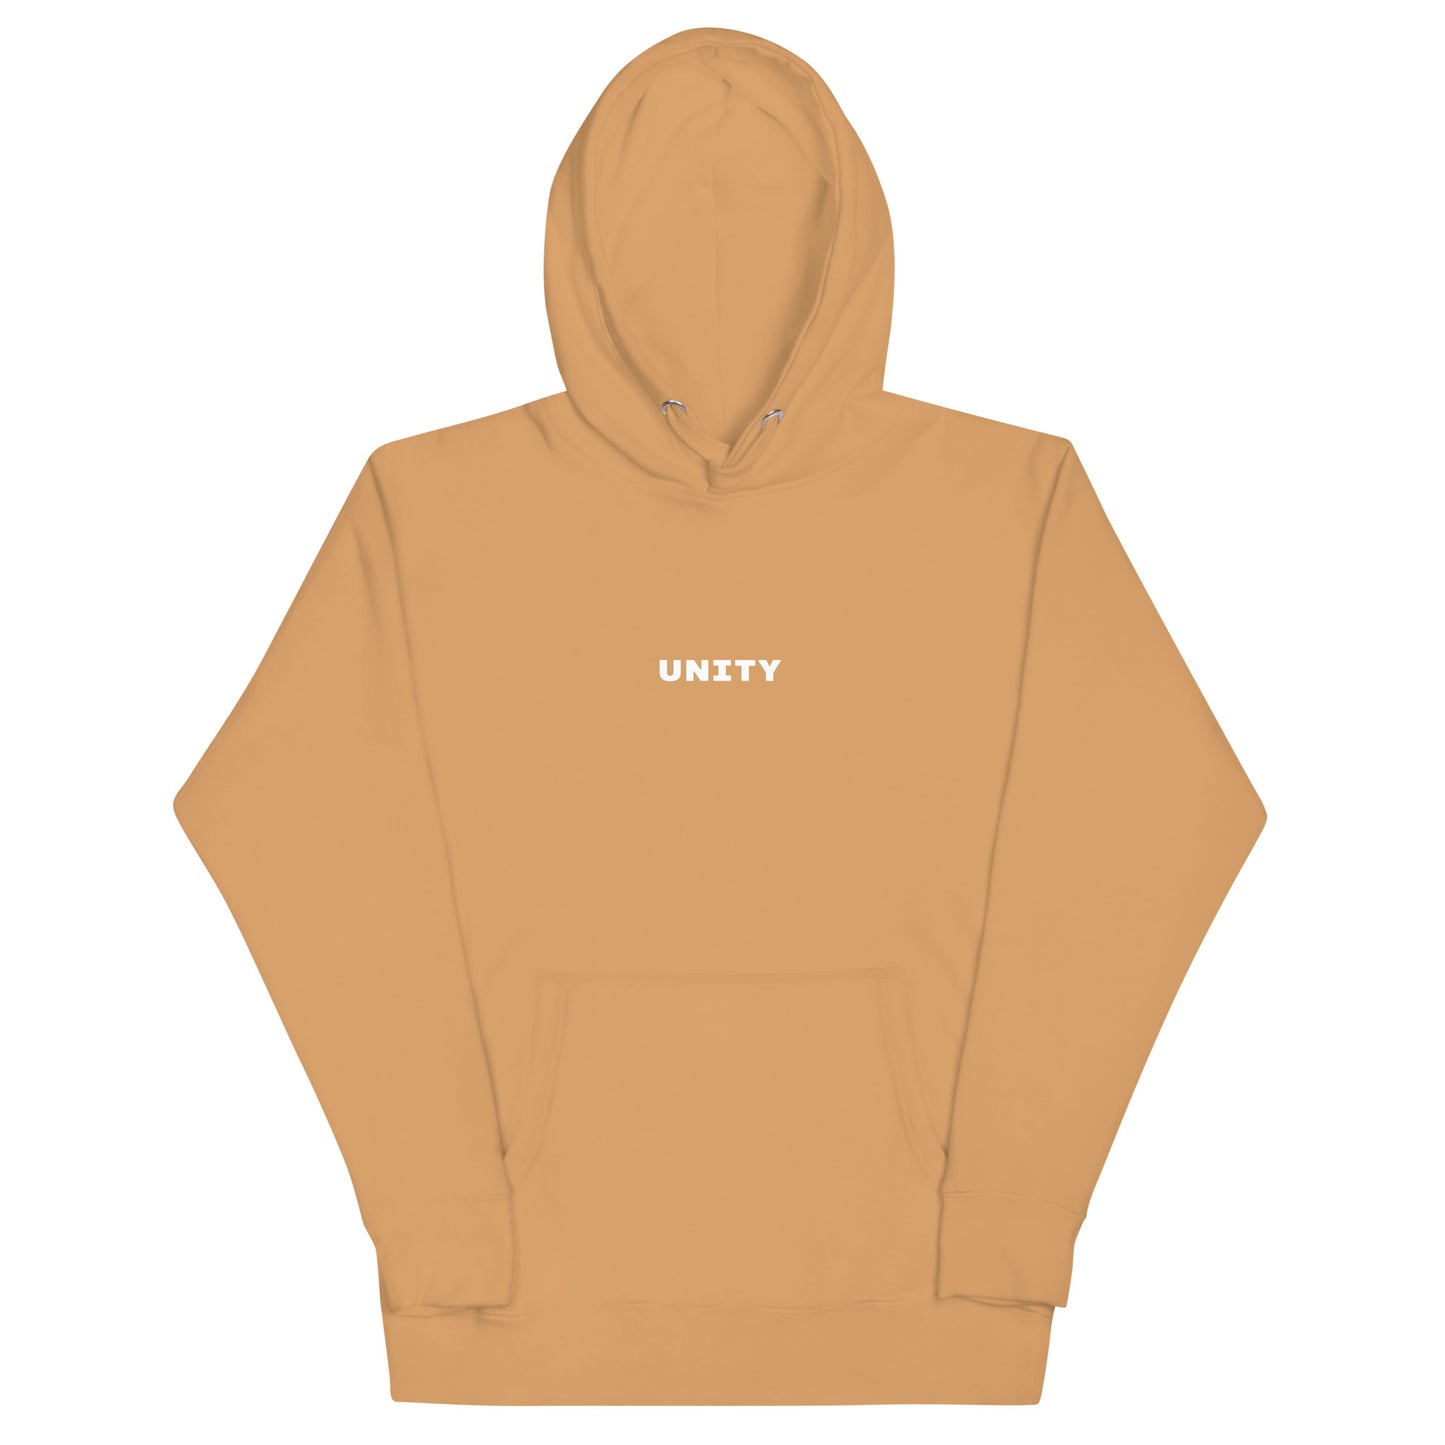 UNITY HOODIE SMILEY FACE CALM TF DOWN HOODIE (MORE COLORS)